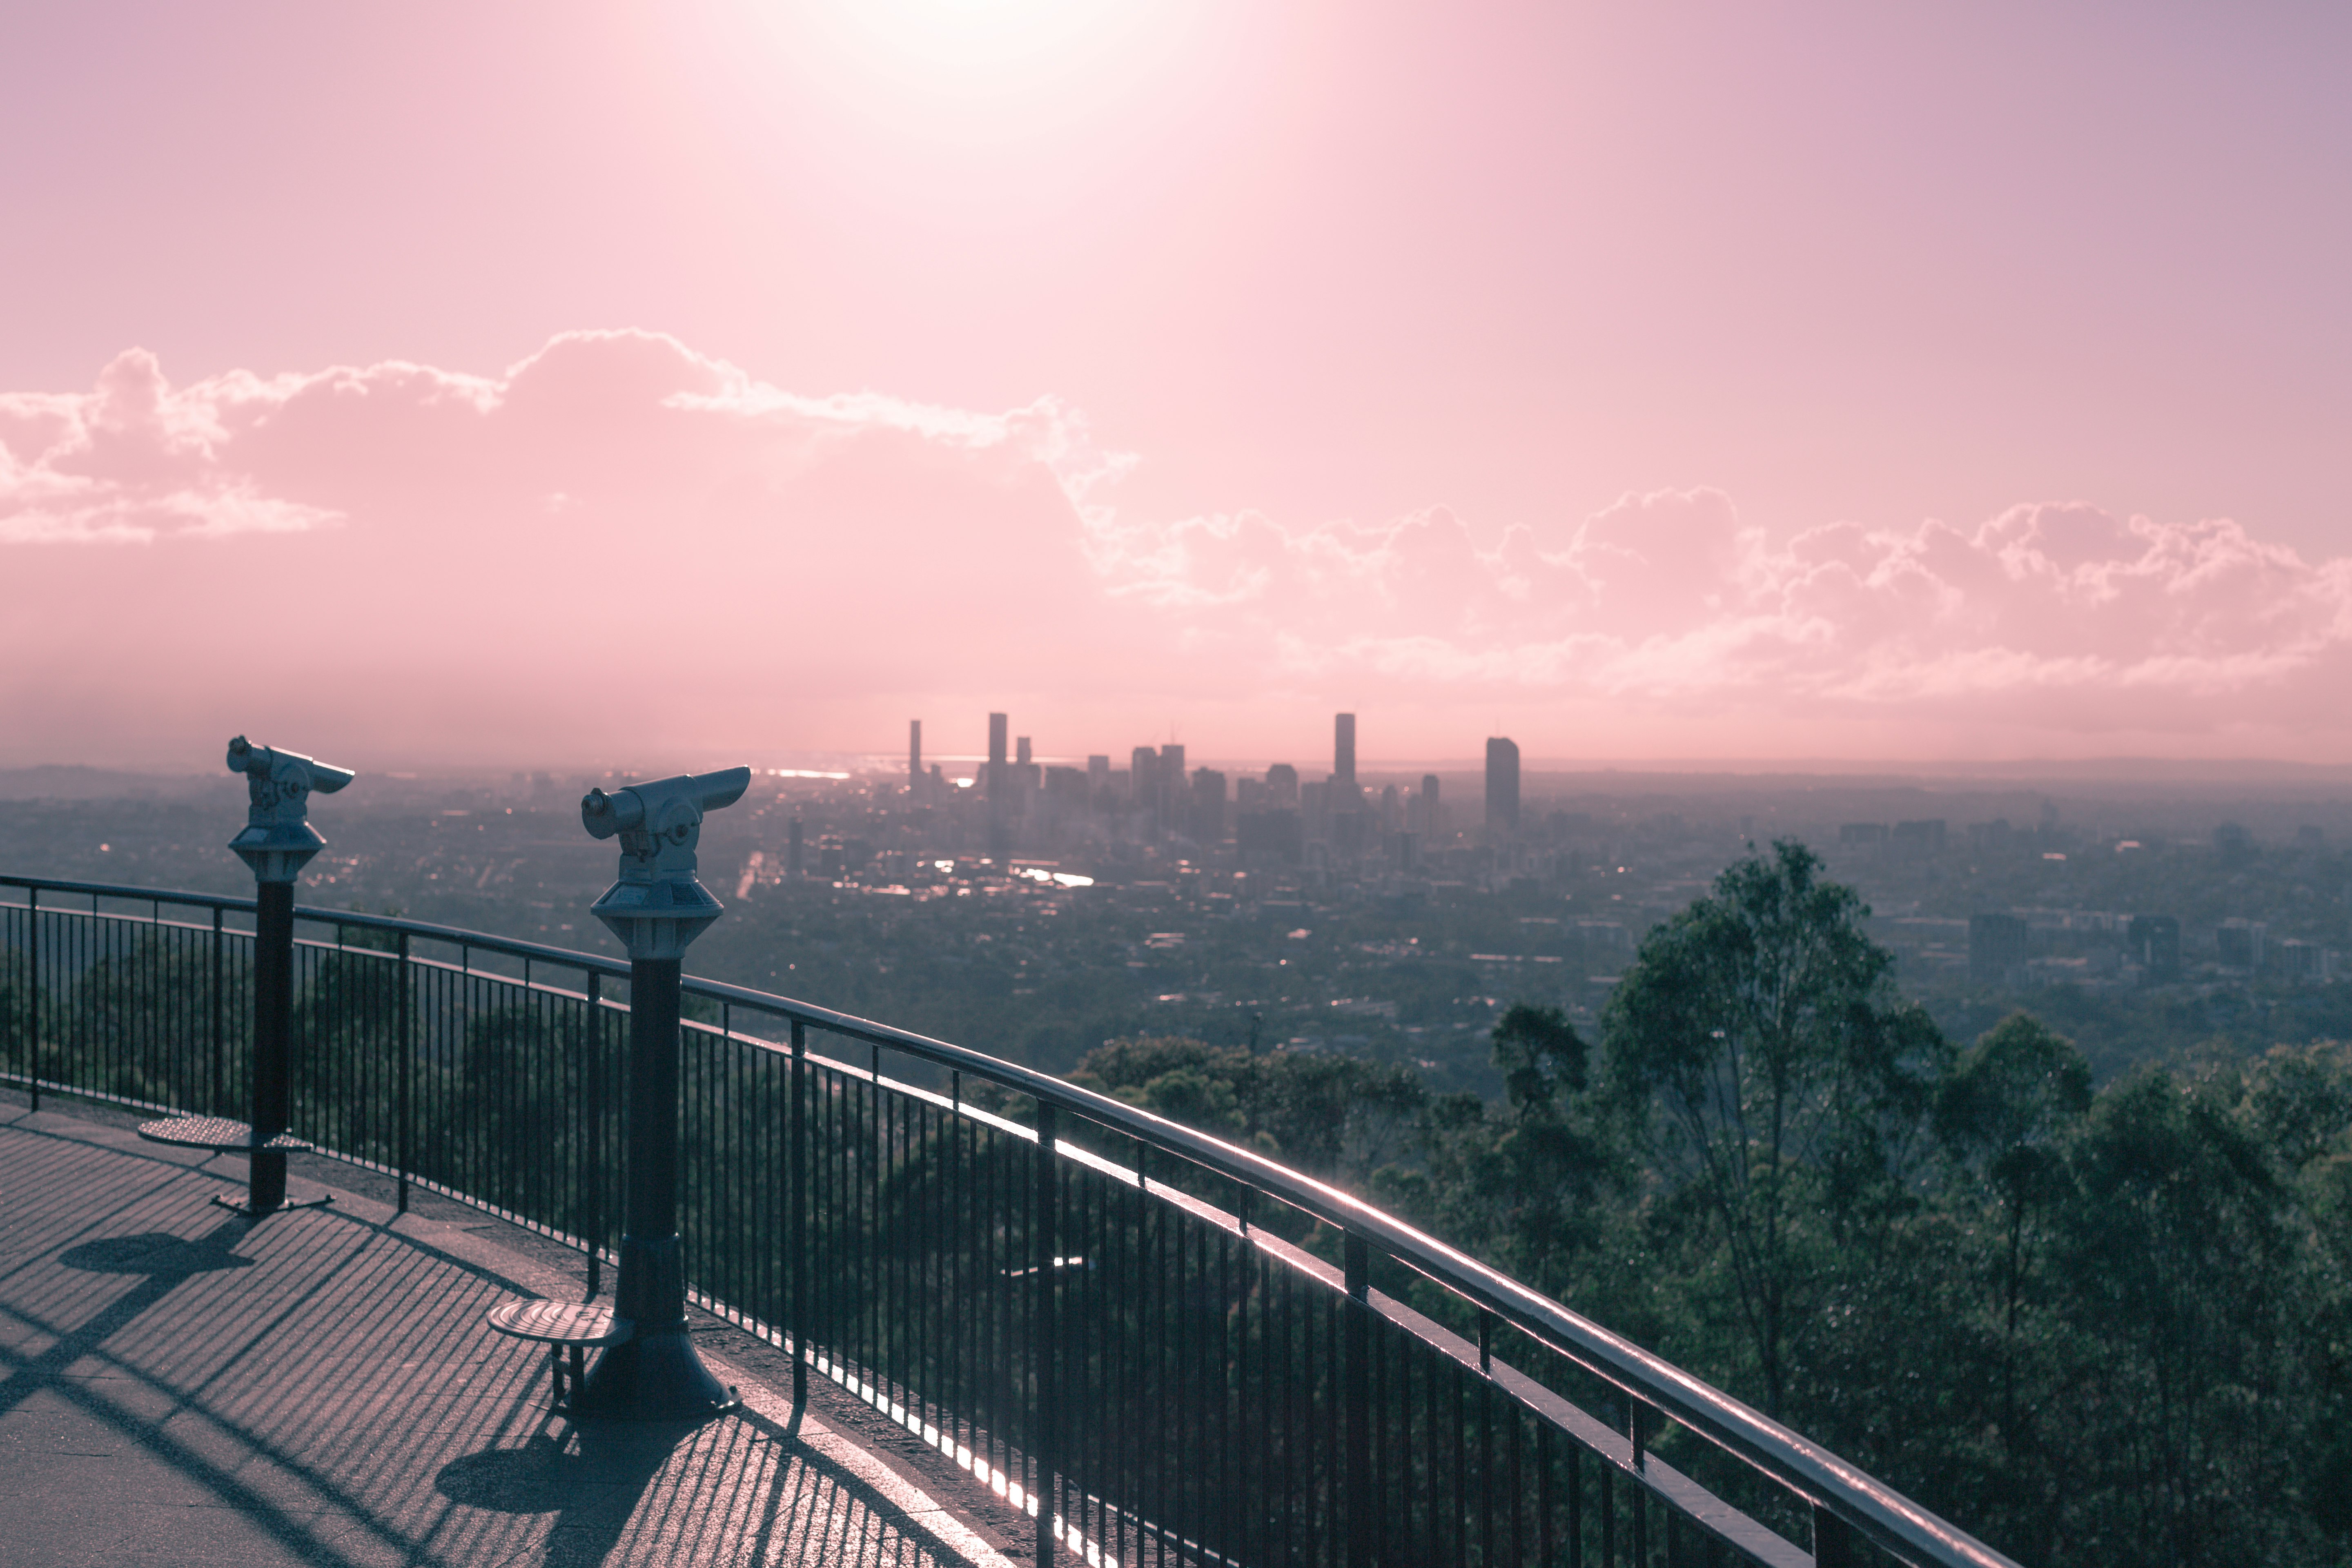 Looking out over the city of Brisbane.